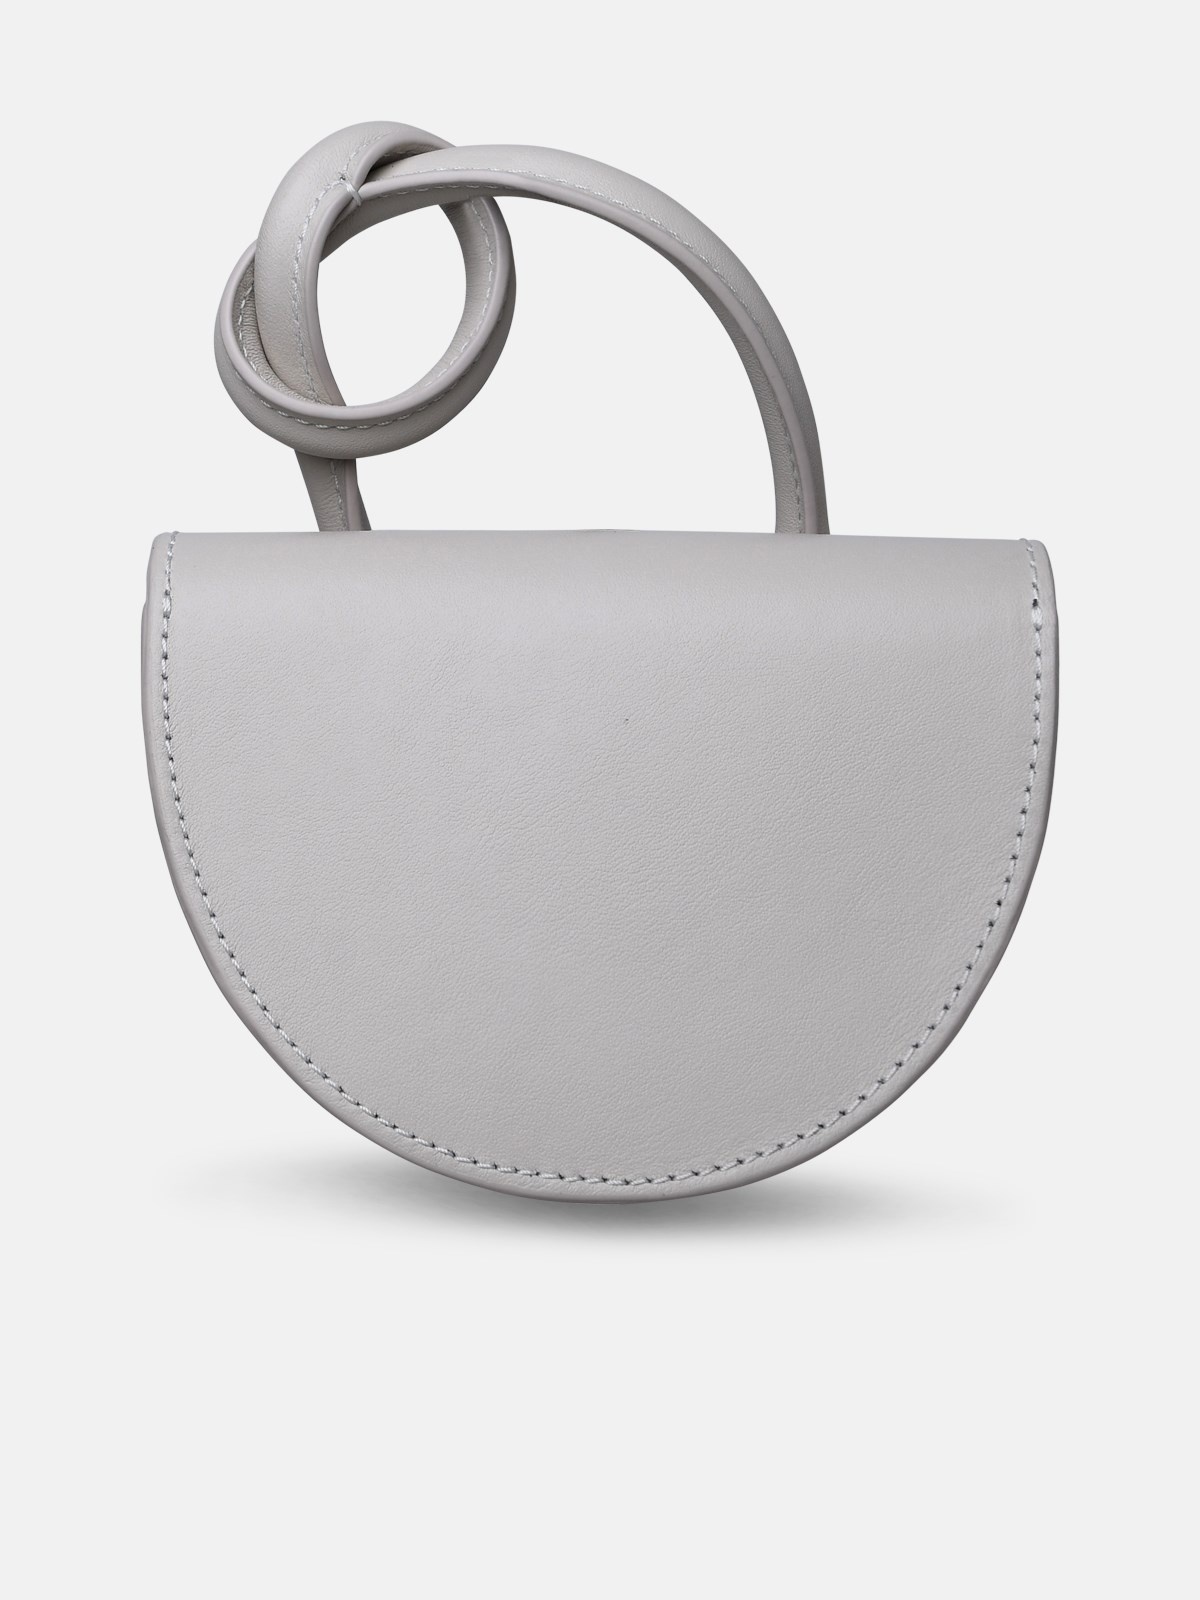 WHITE LEATHER BAG - 3